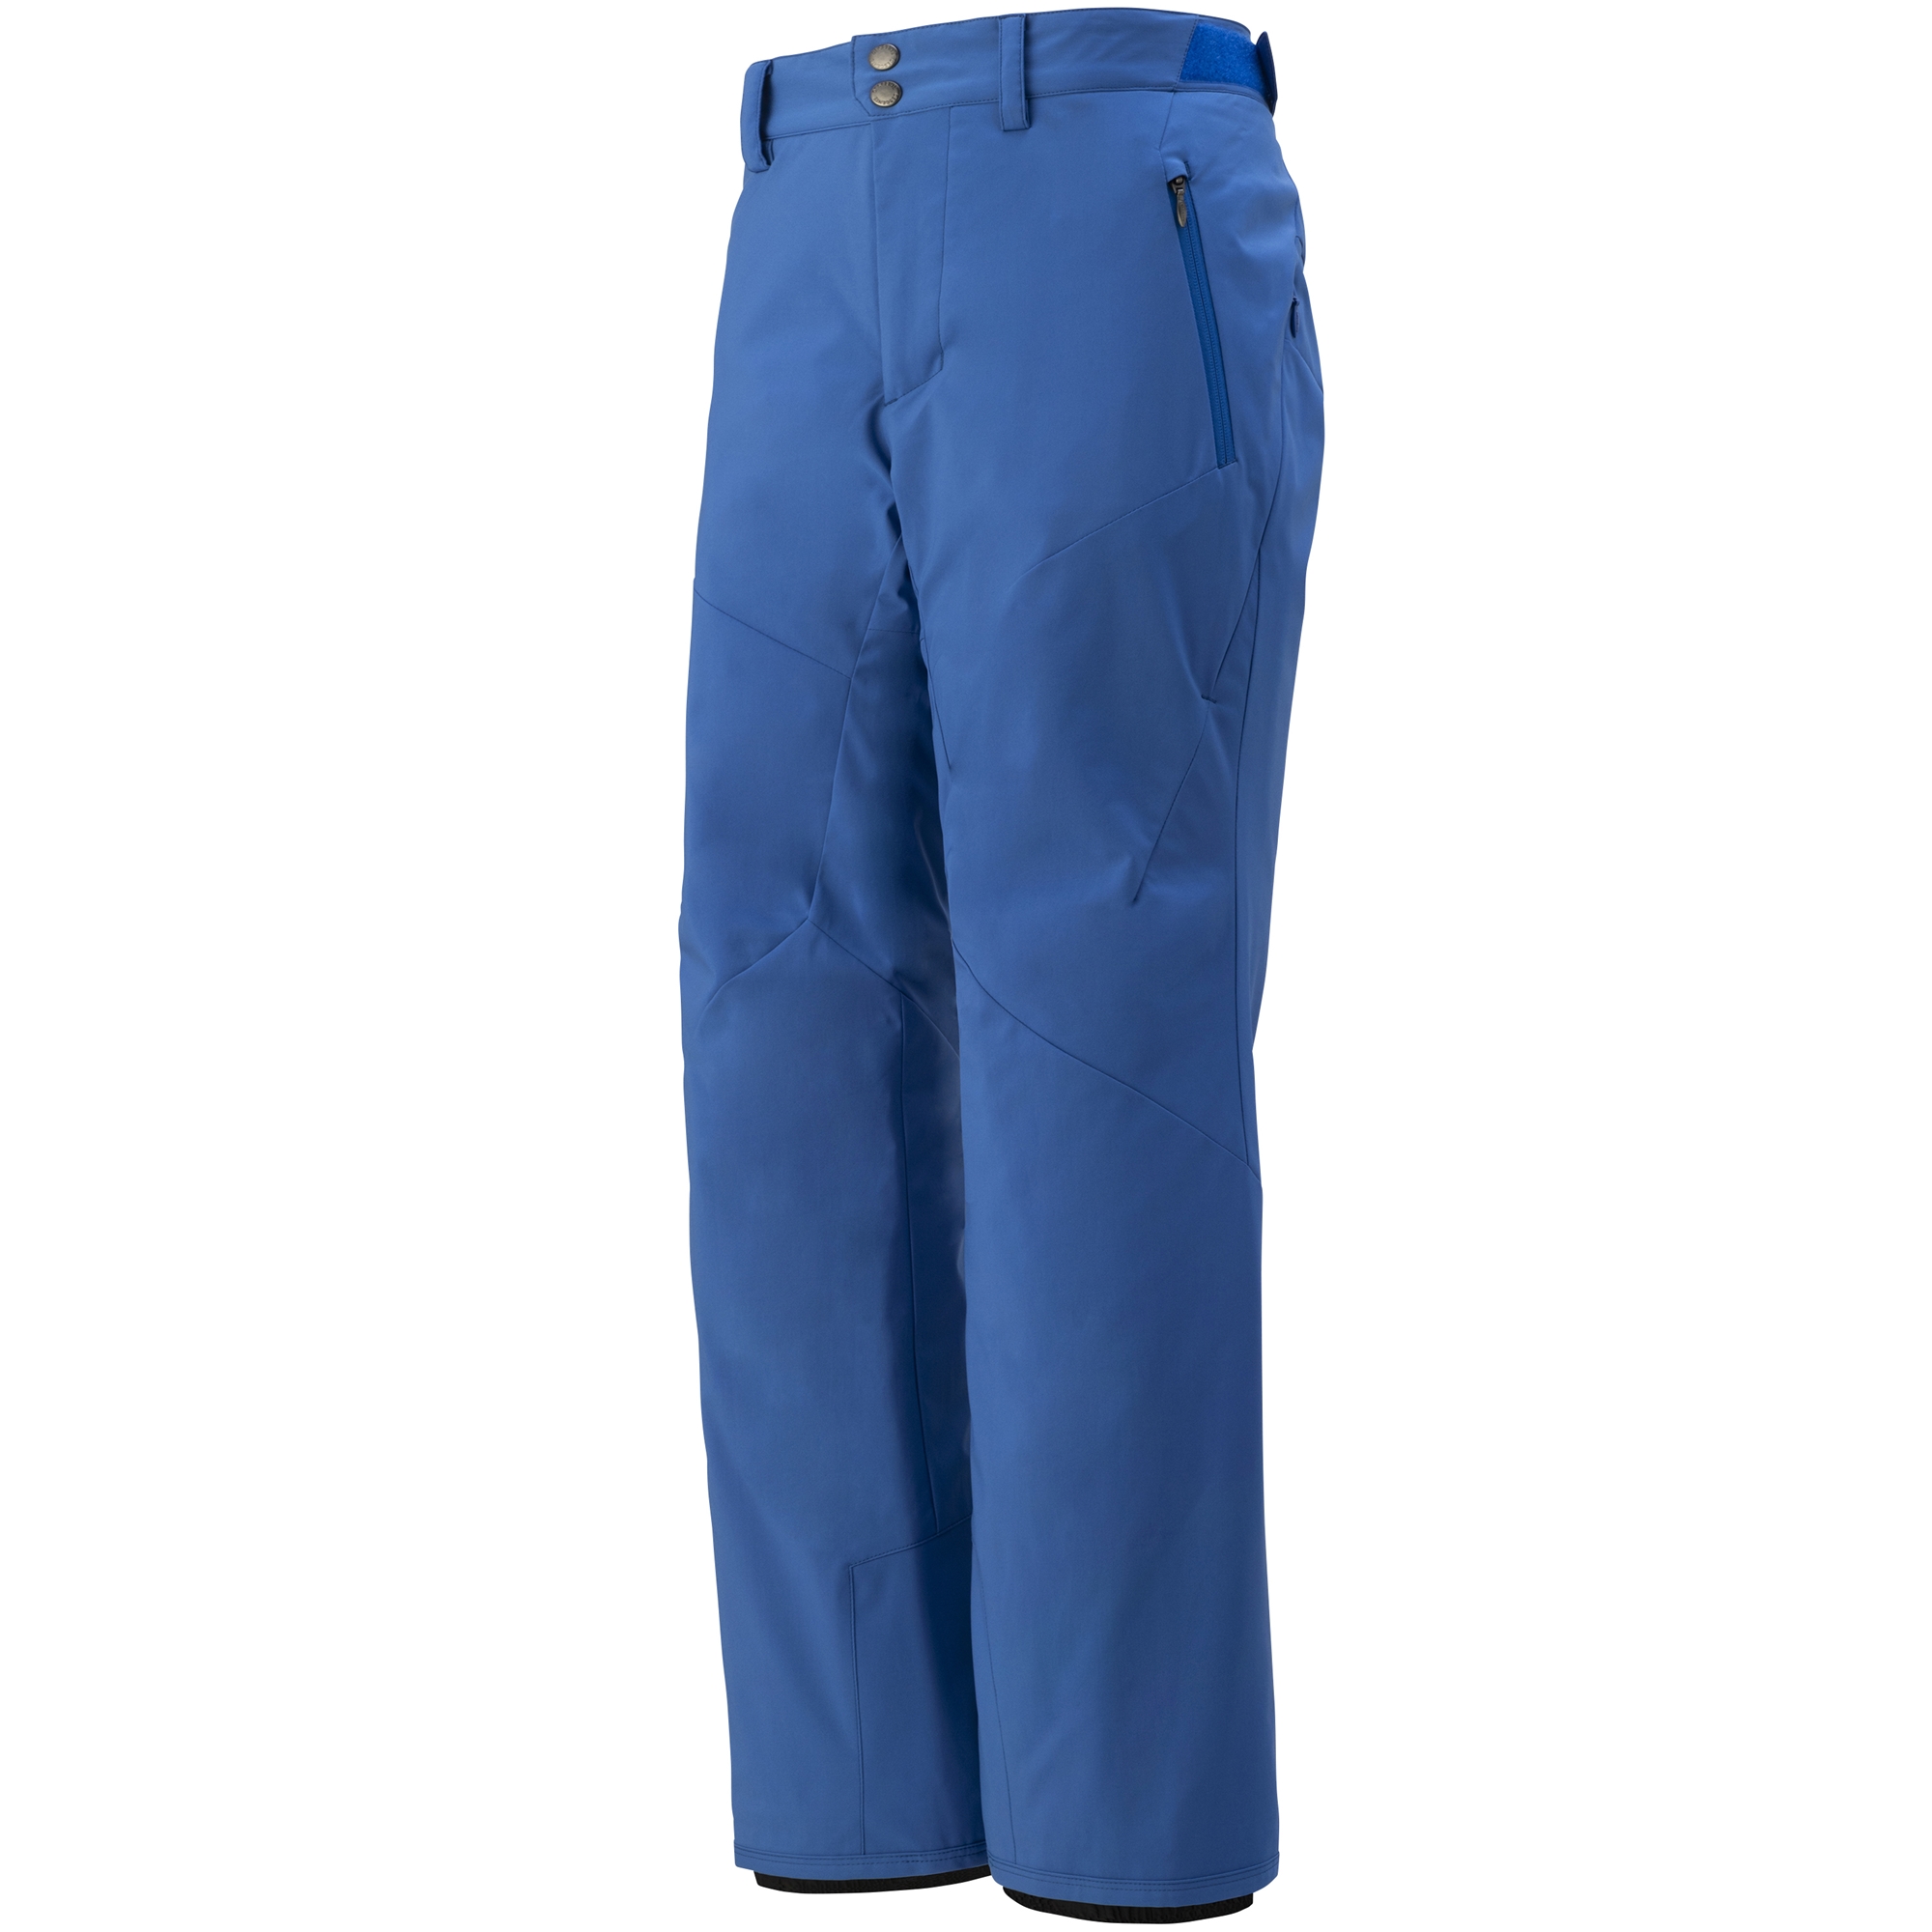 STOCK/INSULATED PANT